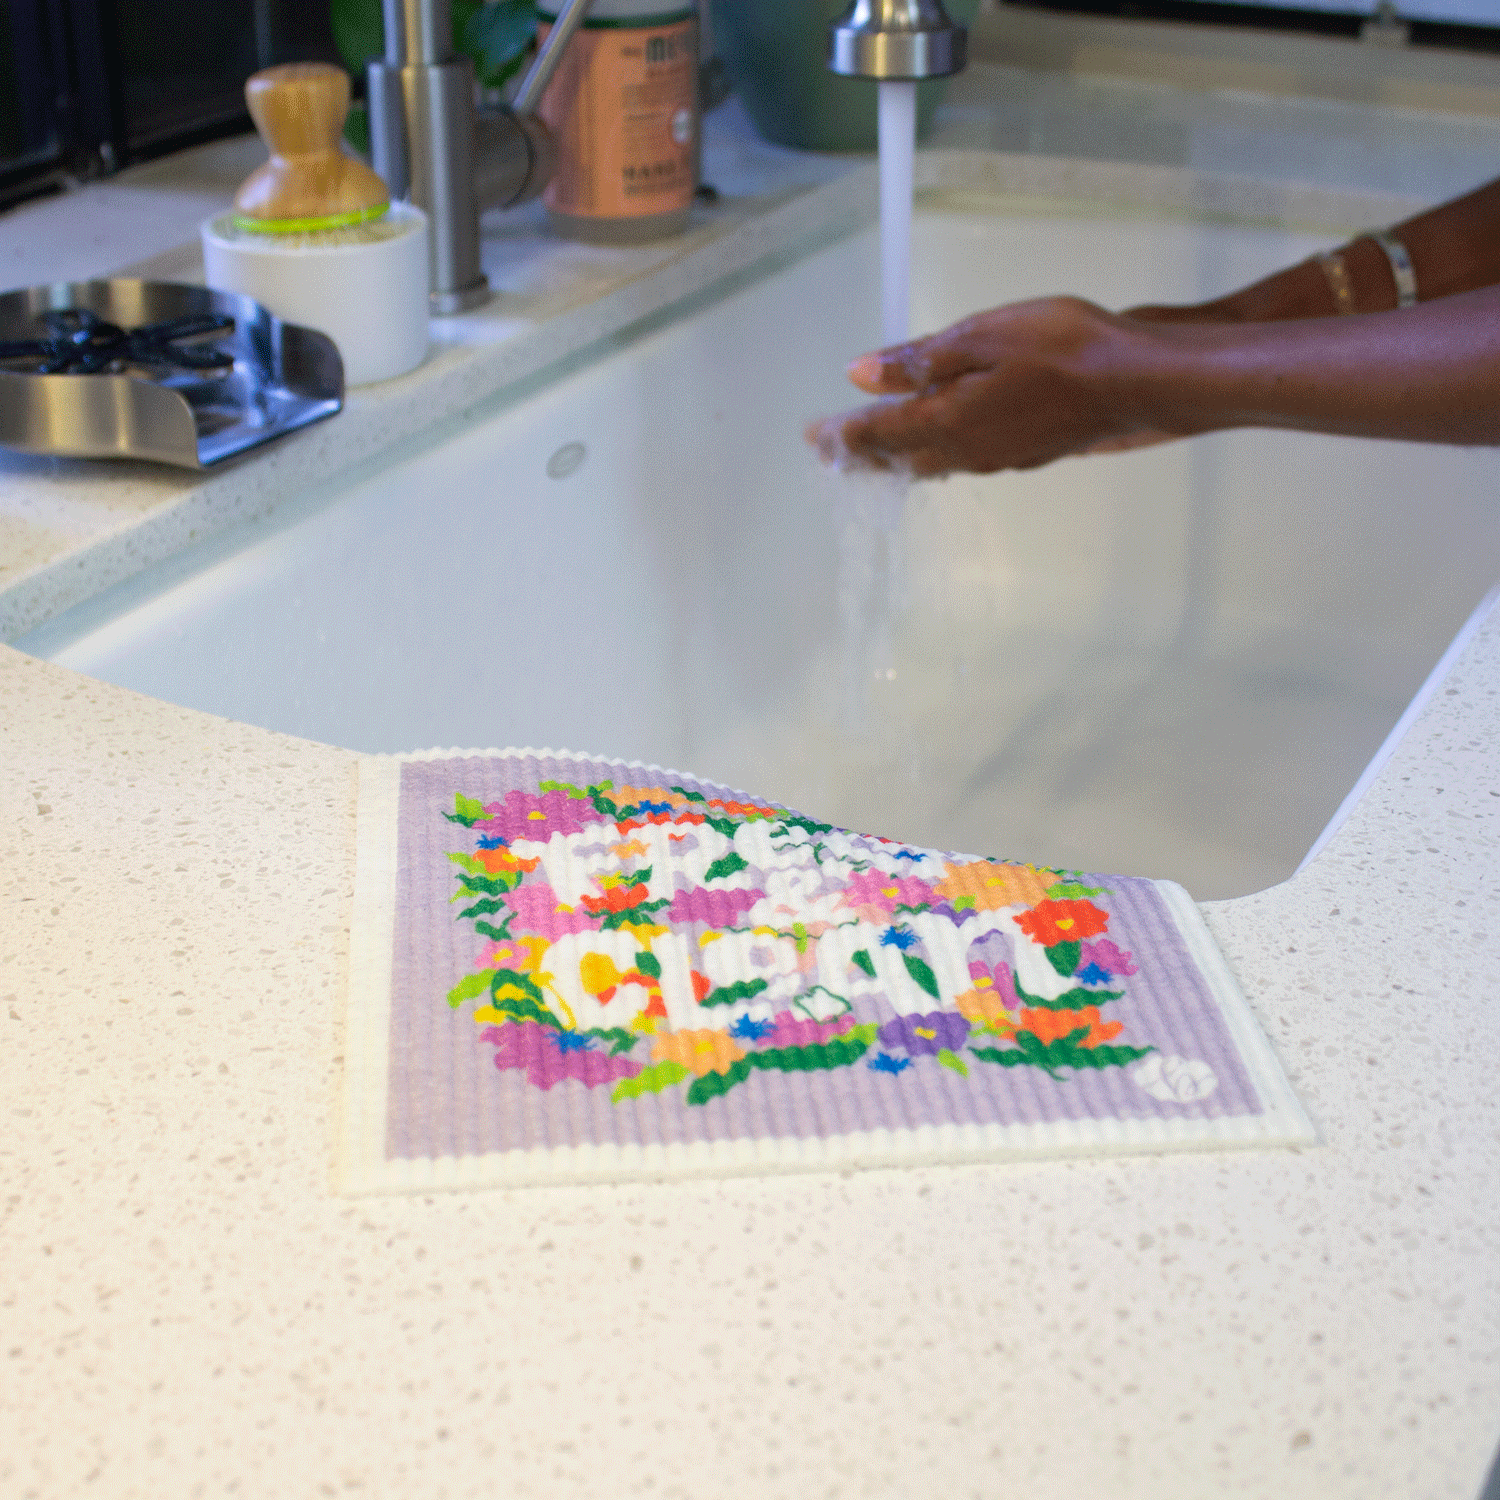 Sponge cloth on the edge of a sink, someone is washing their hands in the background. Sponge cloth has a printed design: “Fresh & Clean” with colorful flowers. Sponge cloth is wet and flexible and the top right corner drapes into the sink.